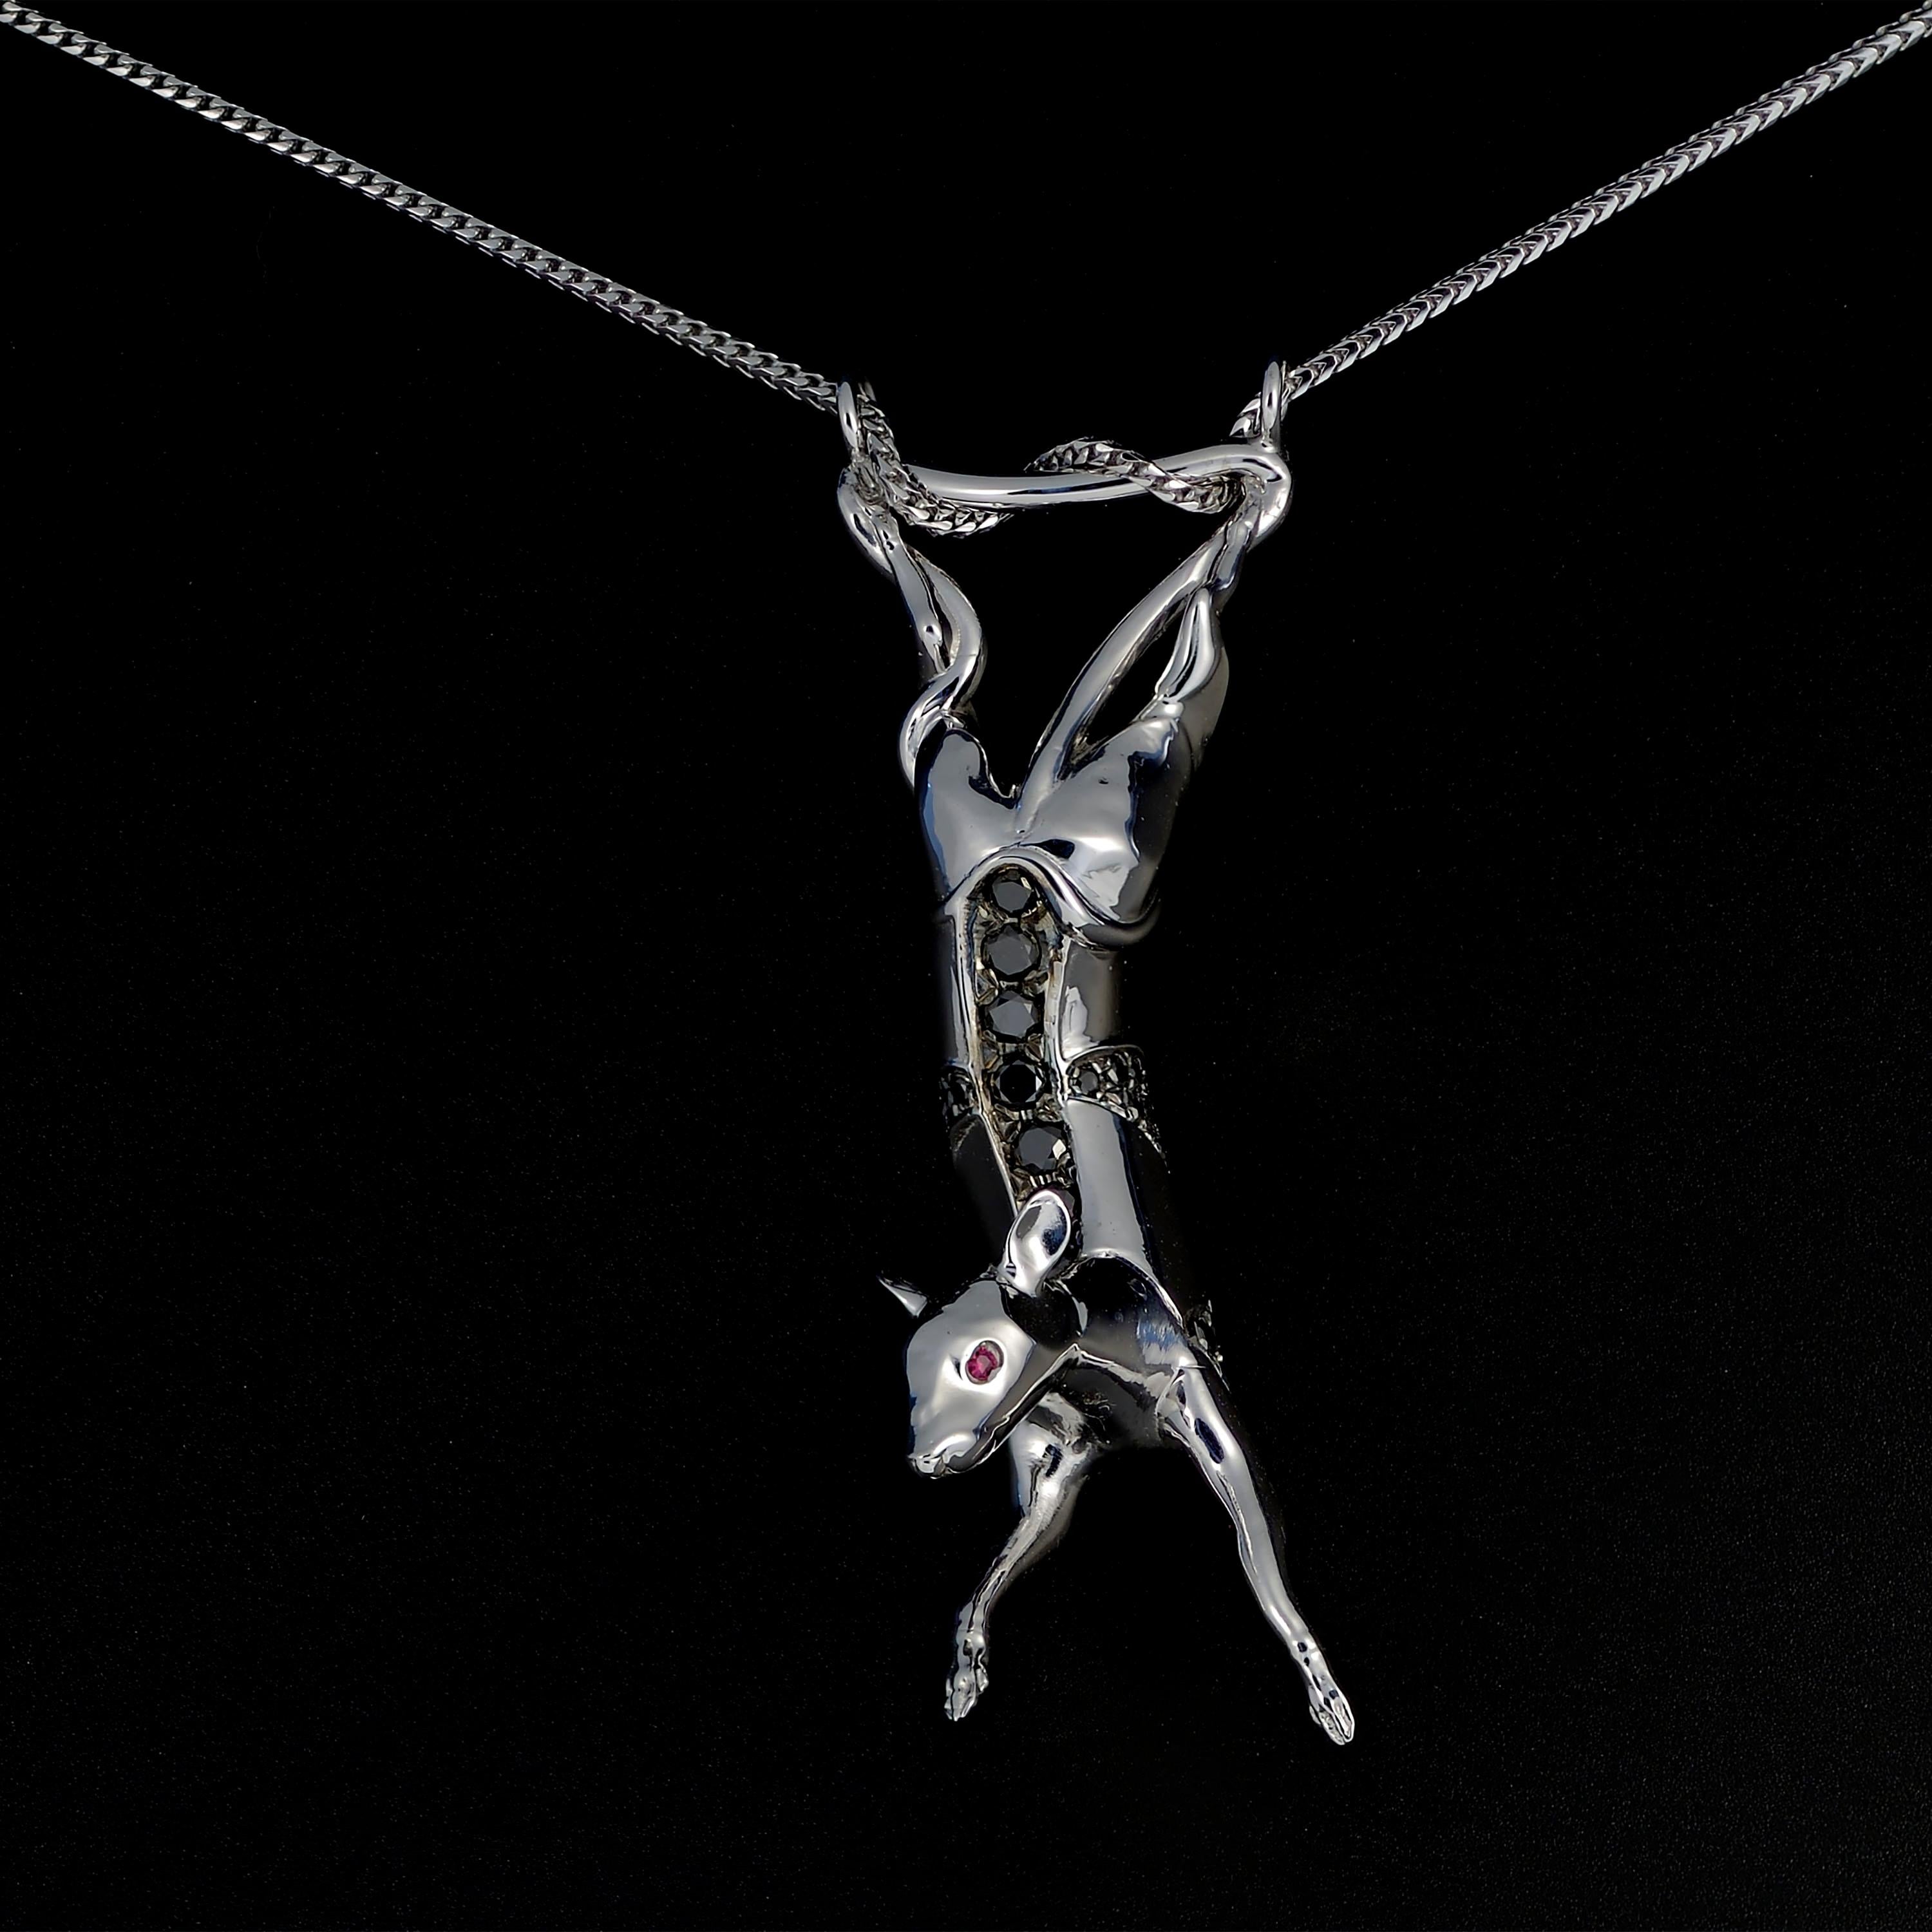 Unique sculptural pendant necklace in 18K white gold set with black diamonds and rubies. 

Created in a mix of Contemporary and Art Deco styles, this figurine of a rat dangling by its tail looks surprised but calm. Panels of darkened gold and black